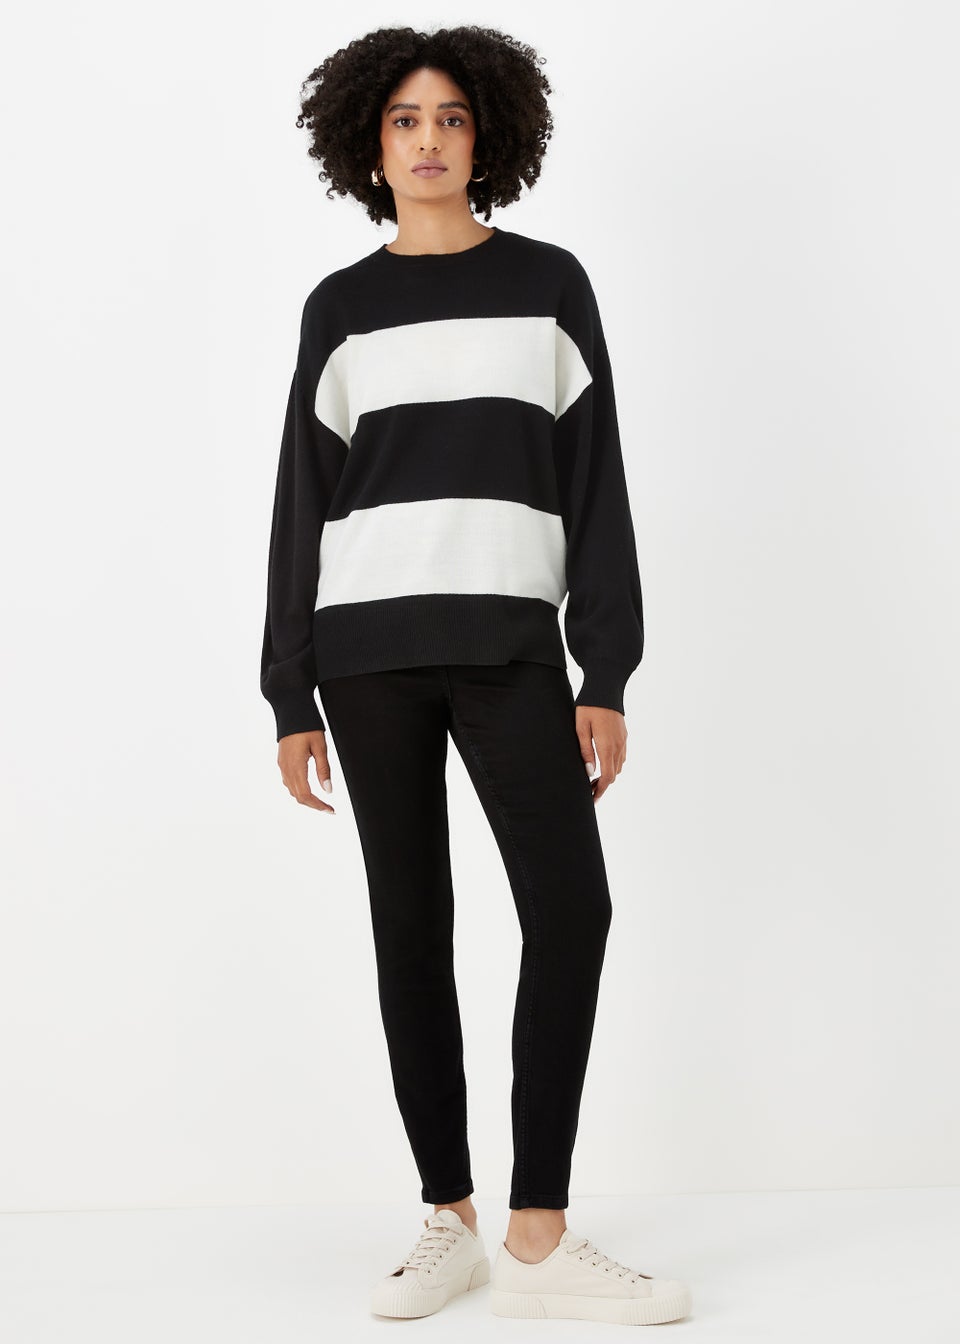 Black & Cream Batwing Sleeve Soft Touch Jumper